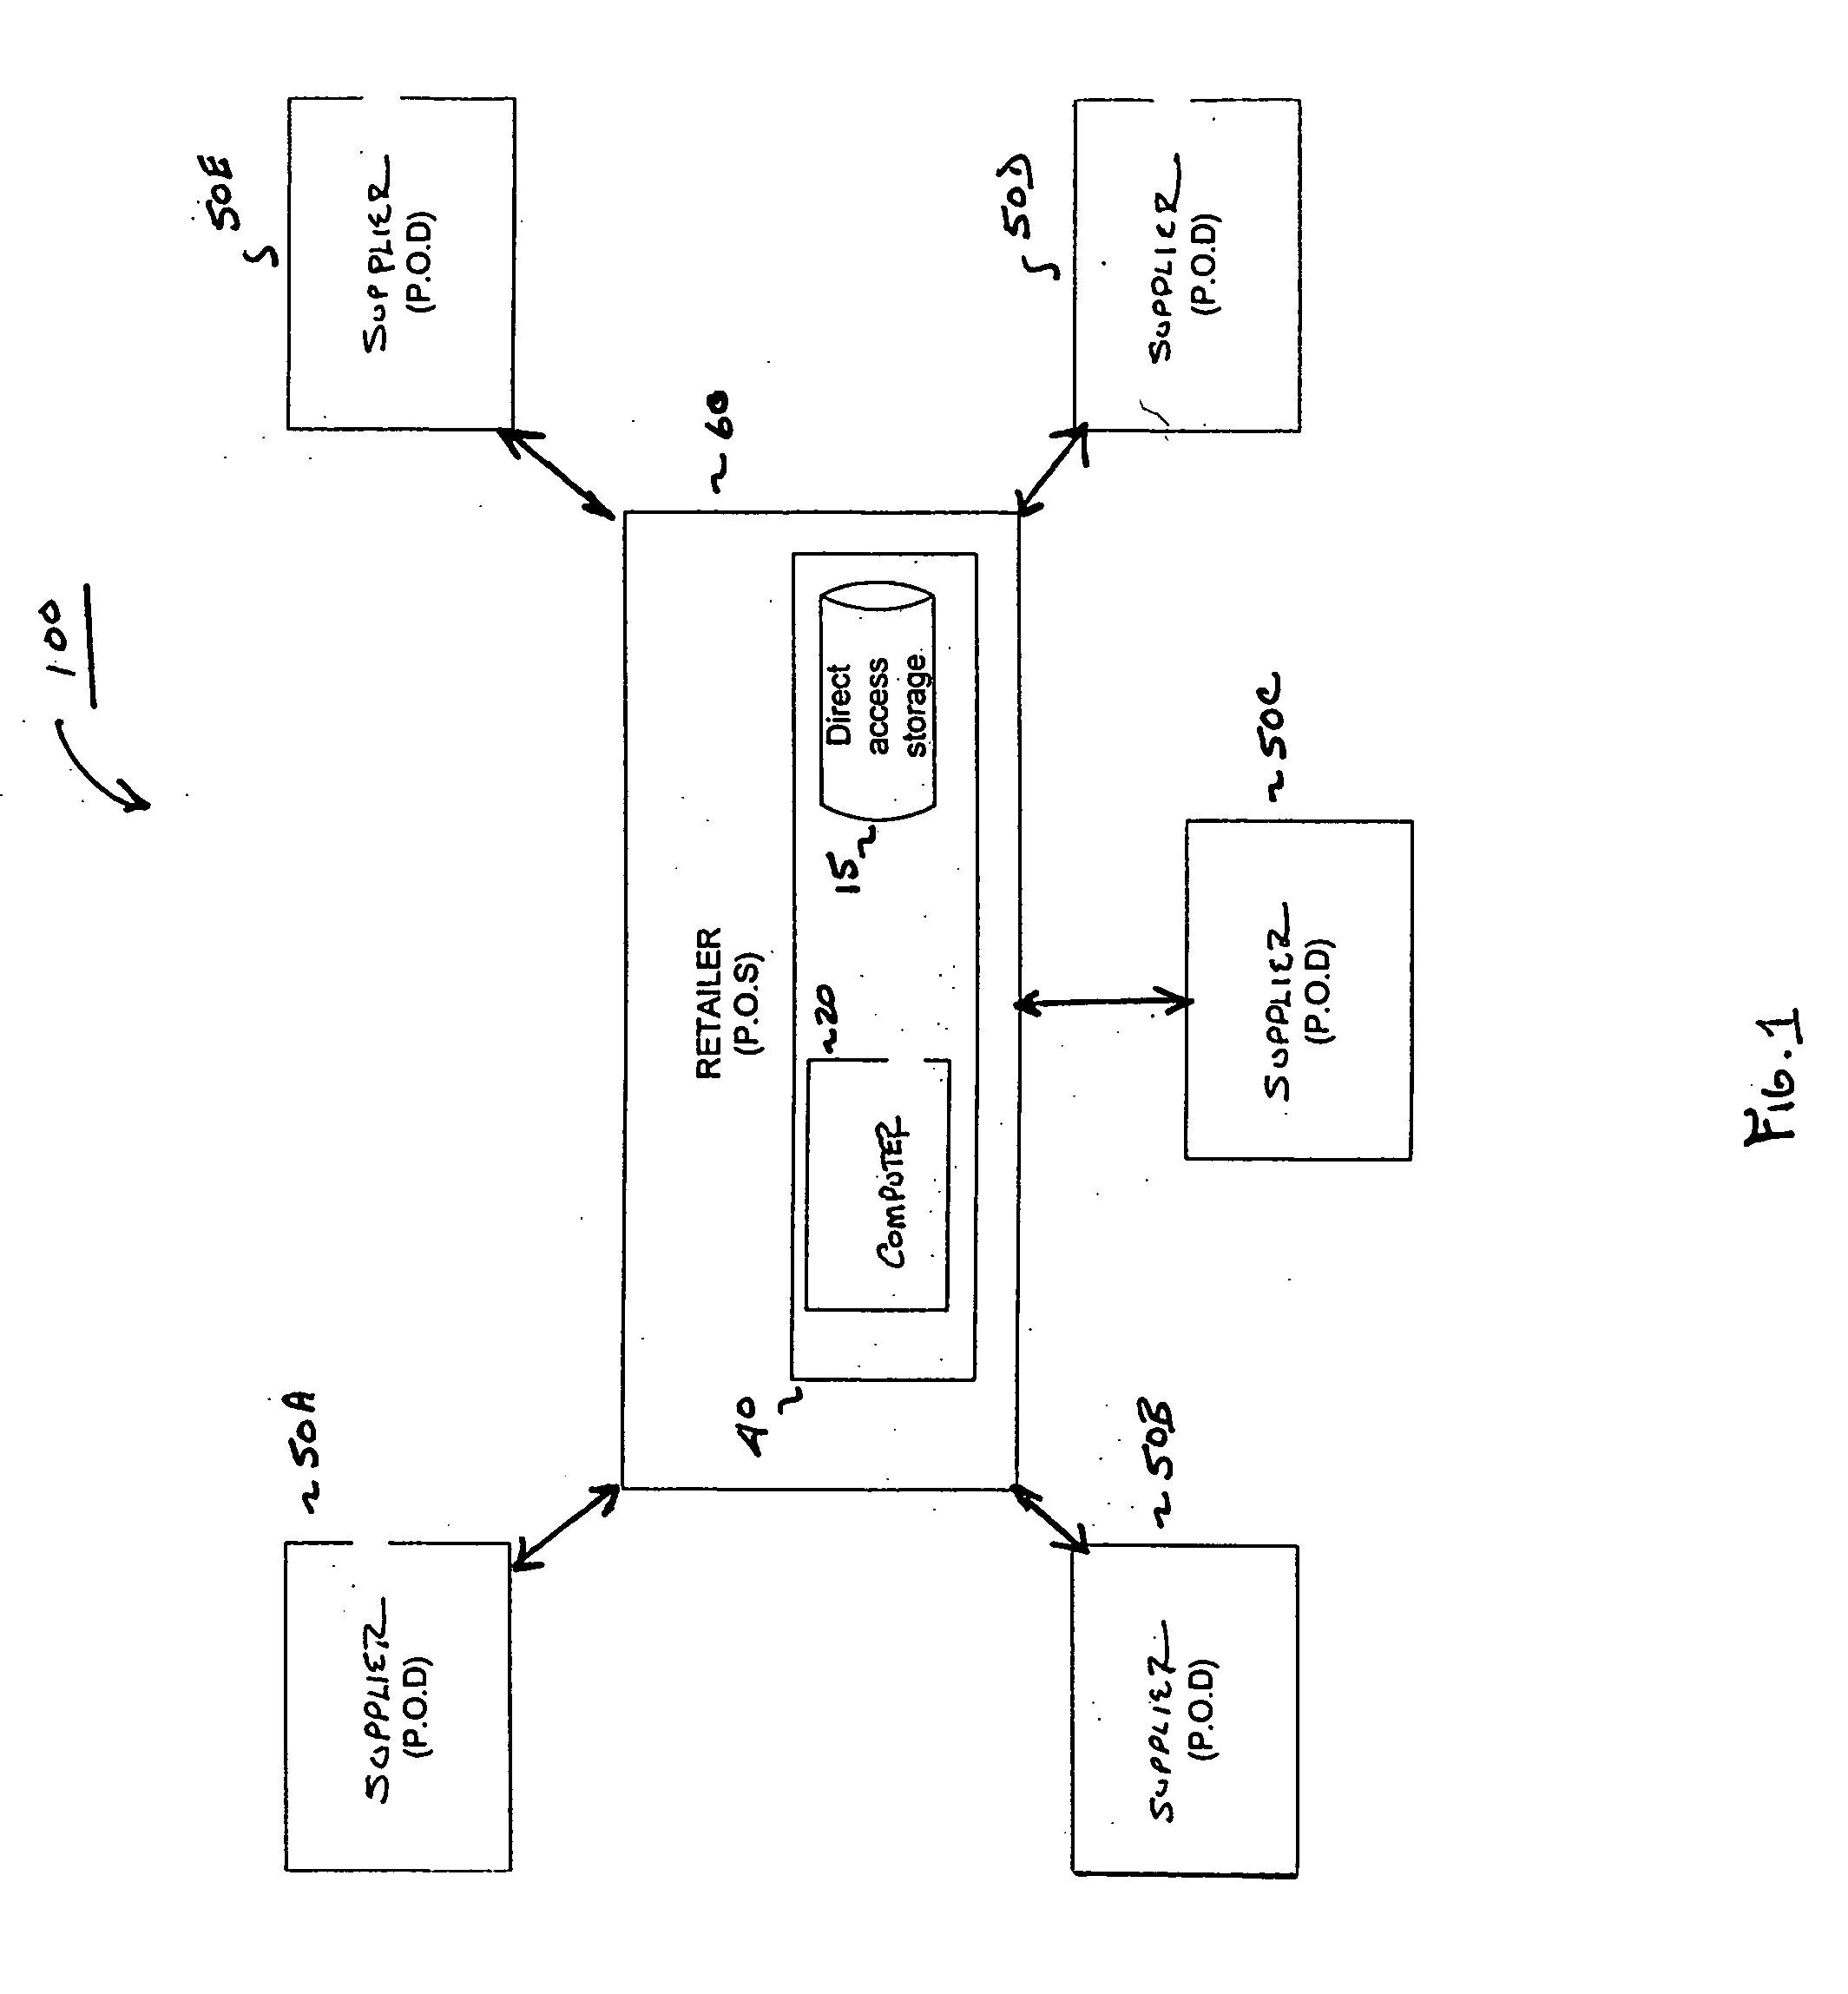 System and method for automatically controlling inventory